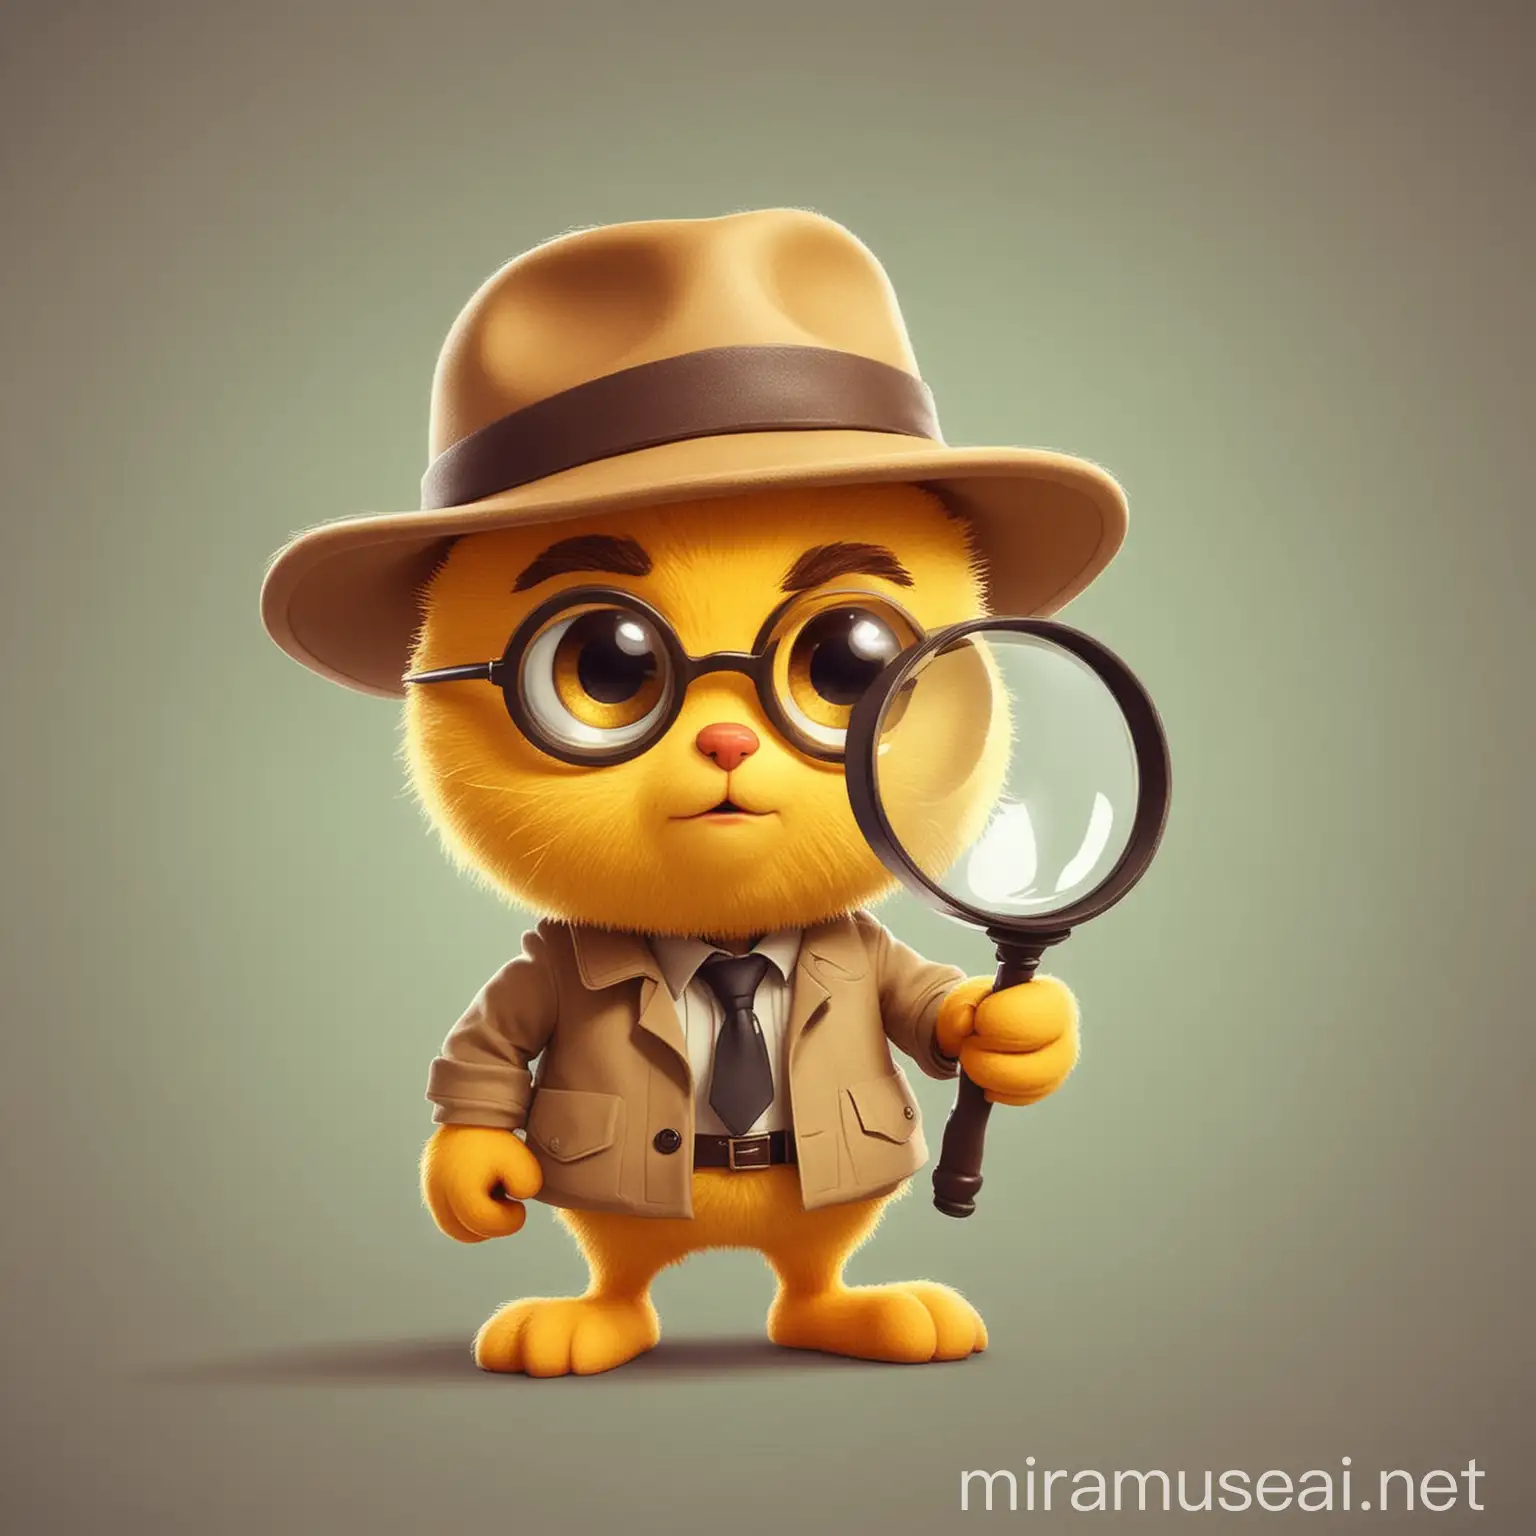 Curious Detective Mascot with Yellow Hat and Magnifying Glass